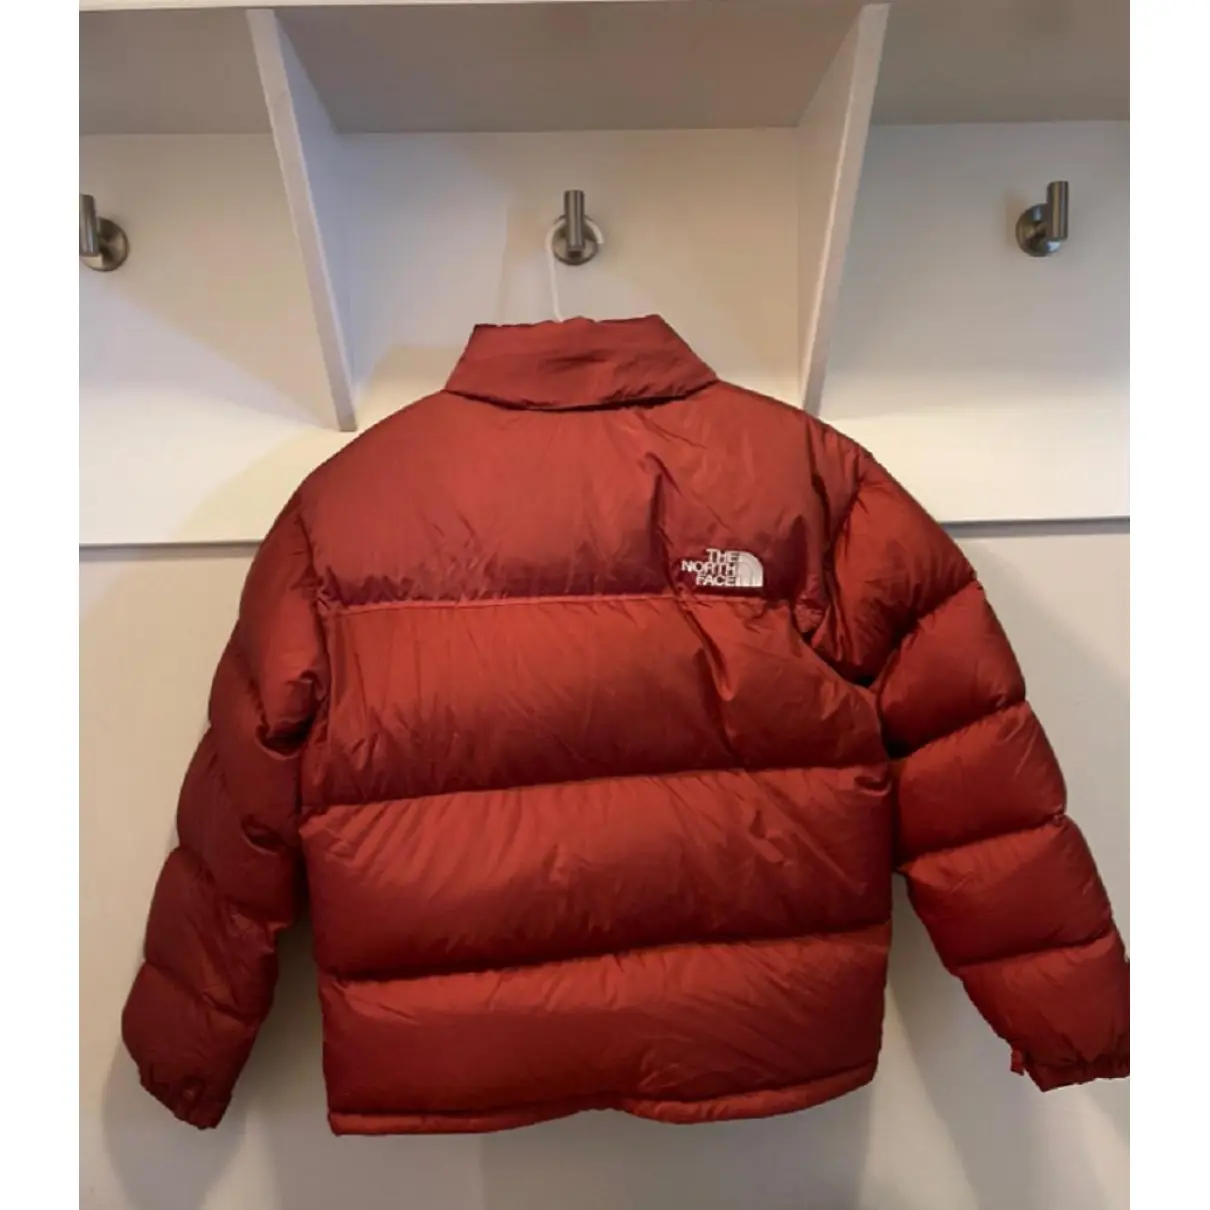 Buy The North Face Pony-style calfskin puffer online - Vintage